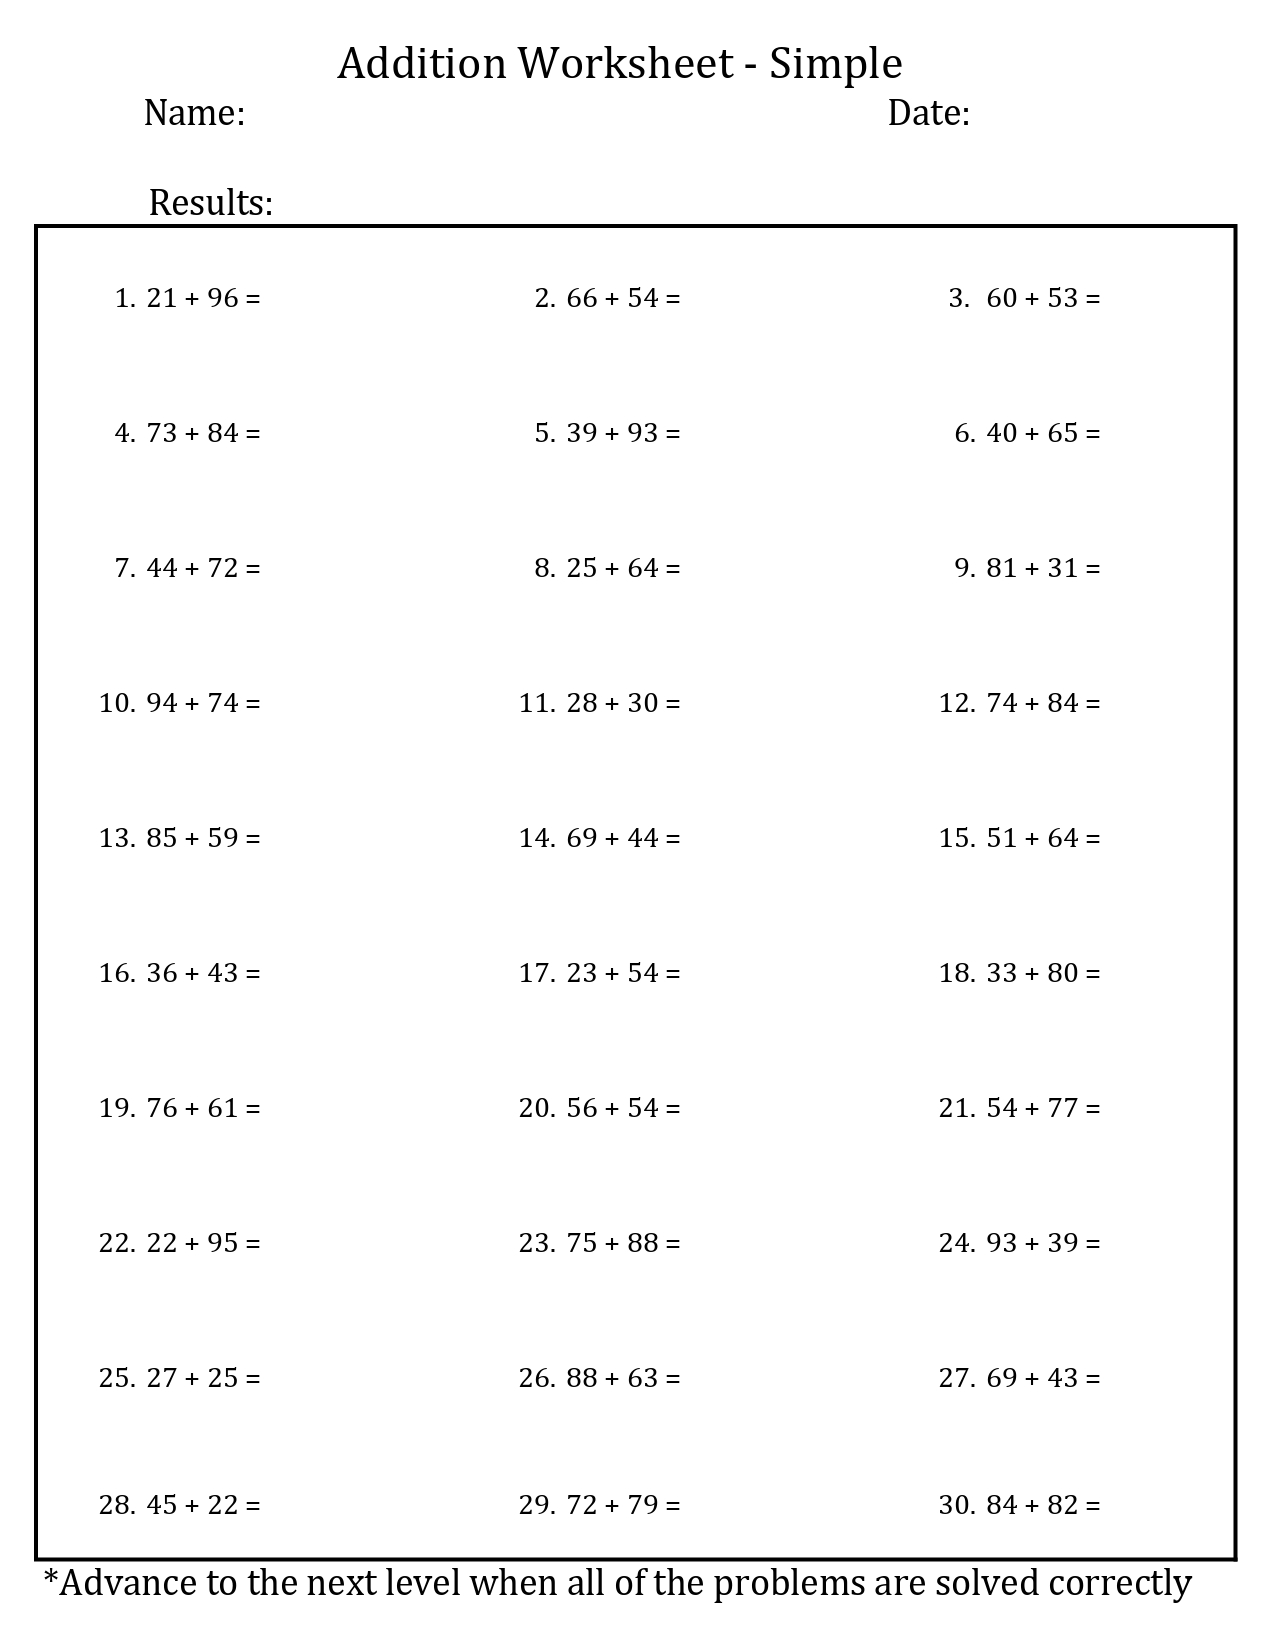 Addition simple worksheets